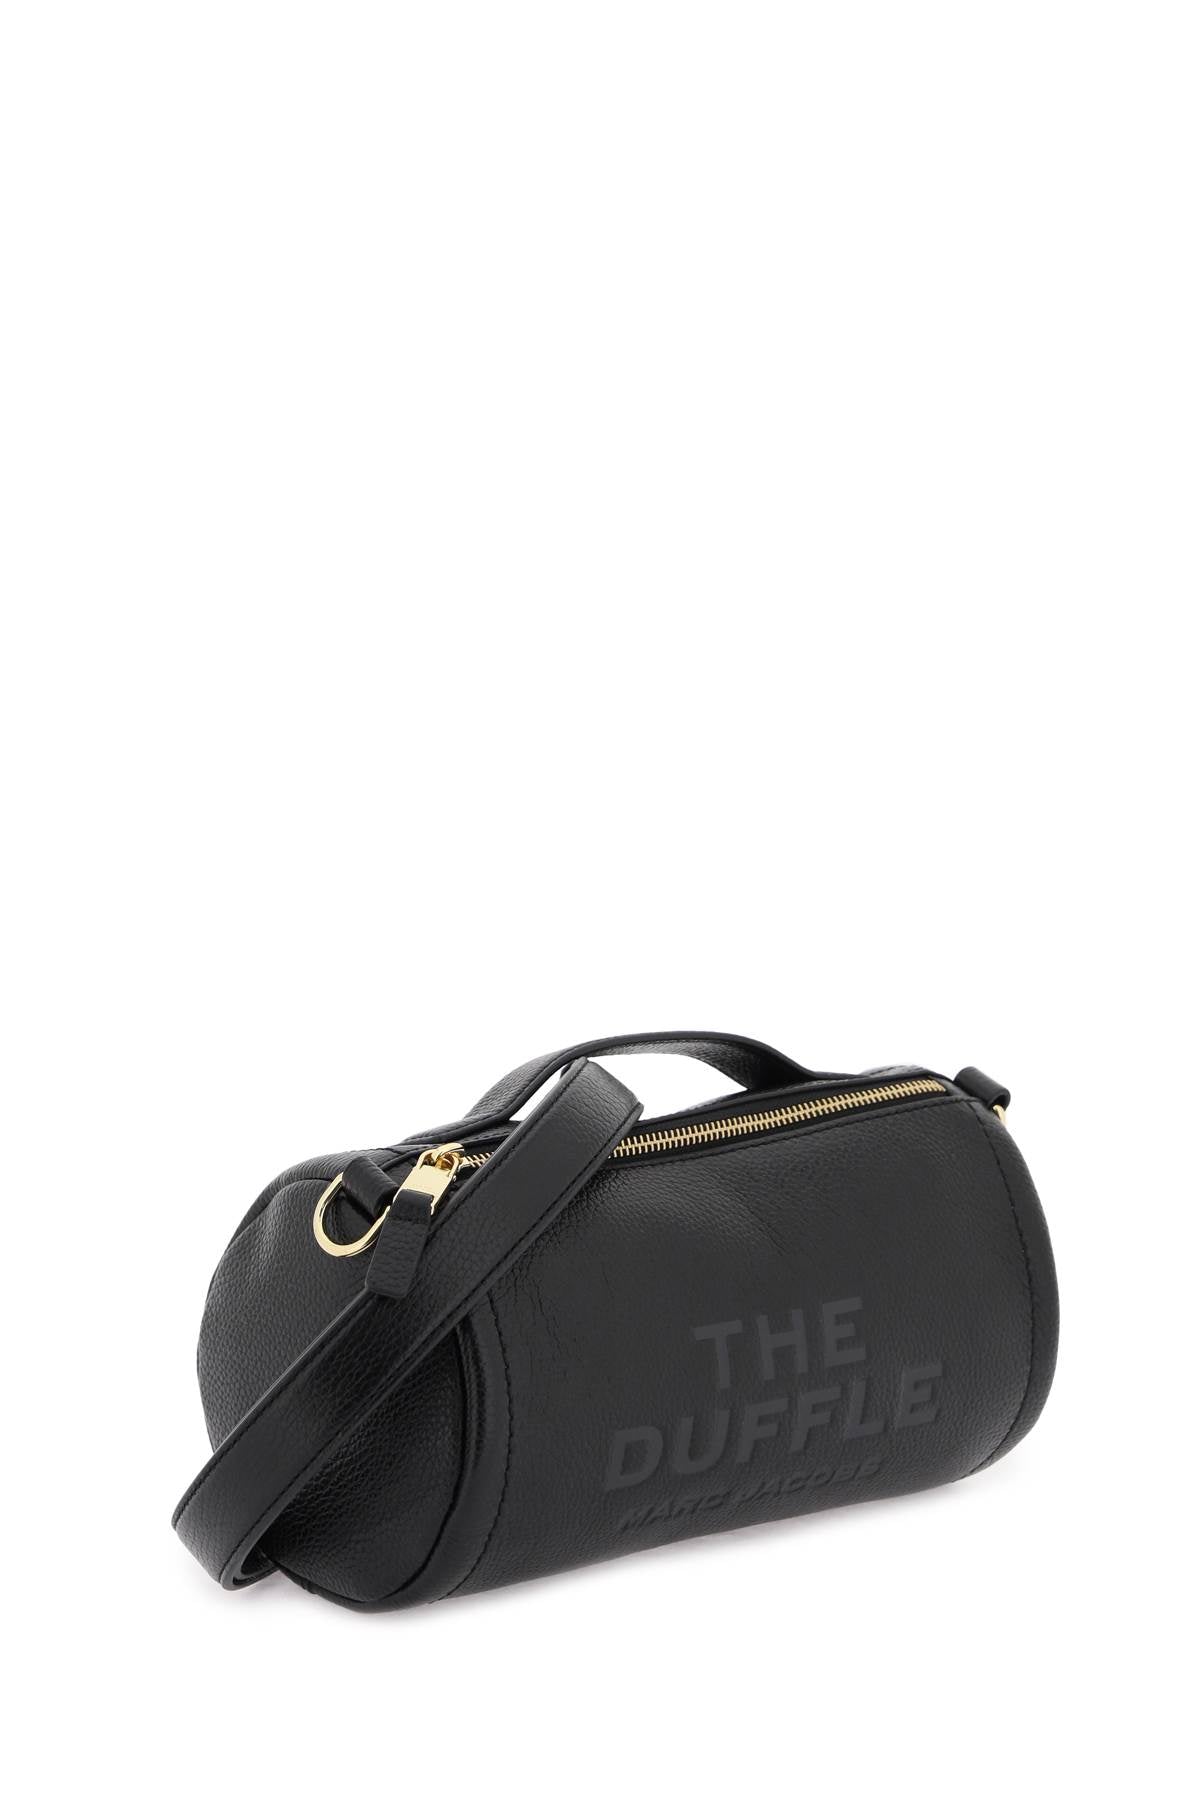 Marc jacobs the leather duffle bag-2